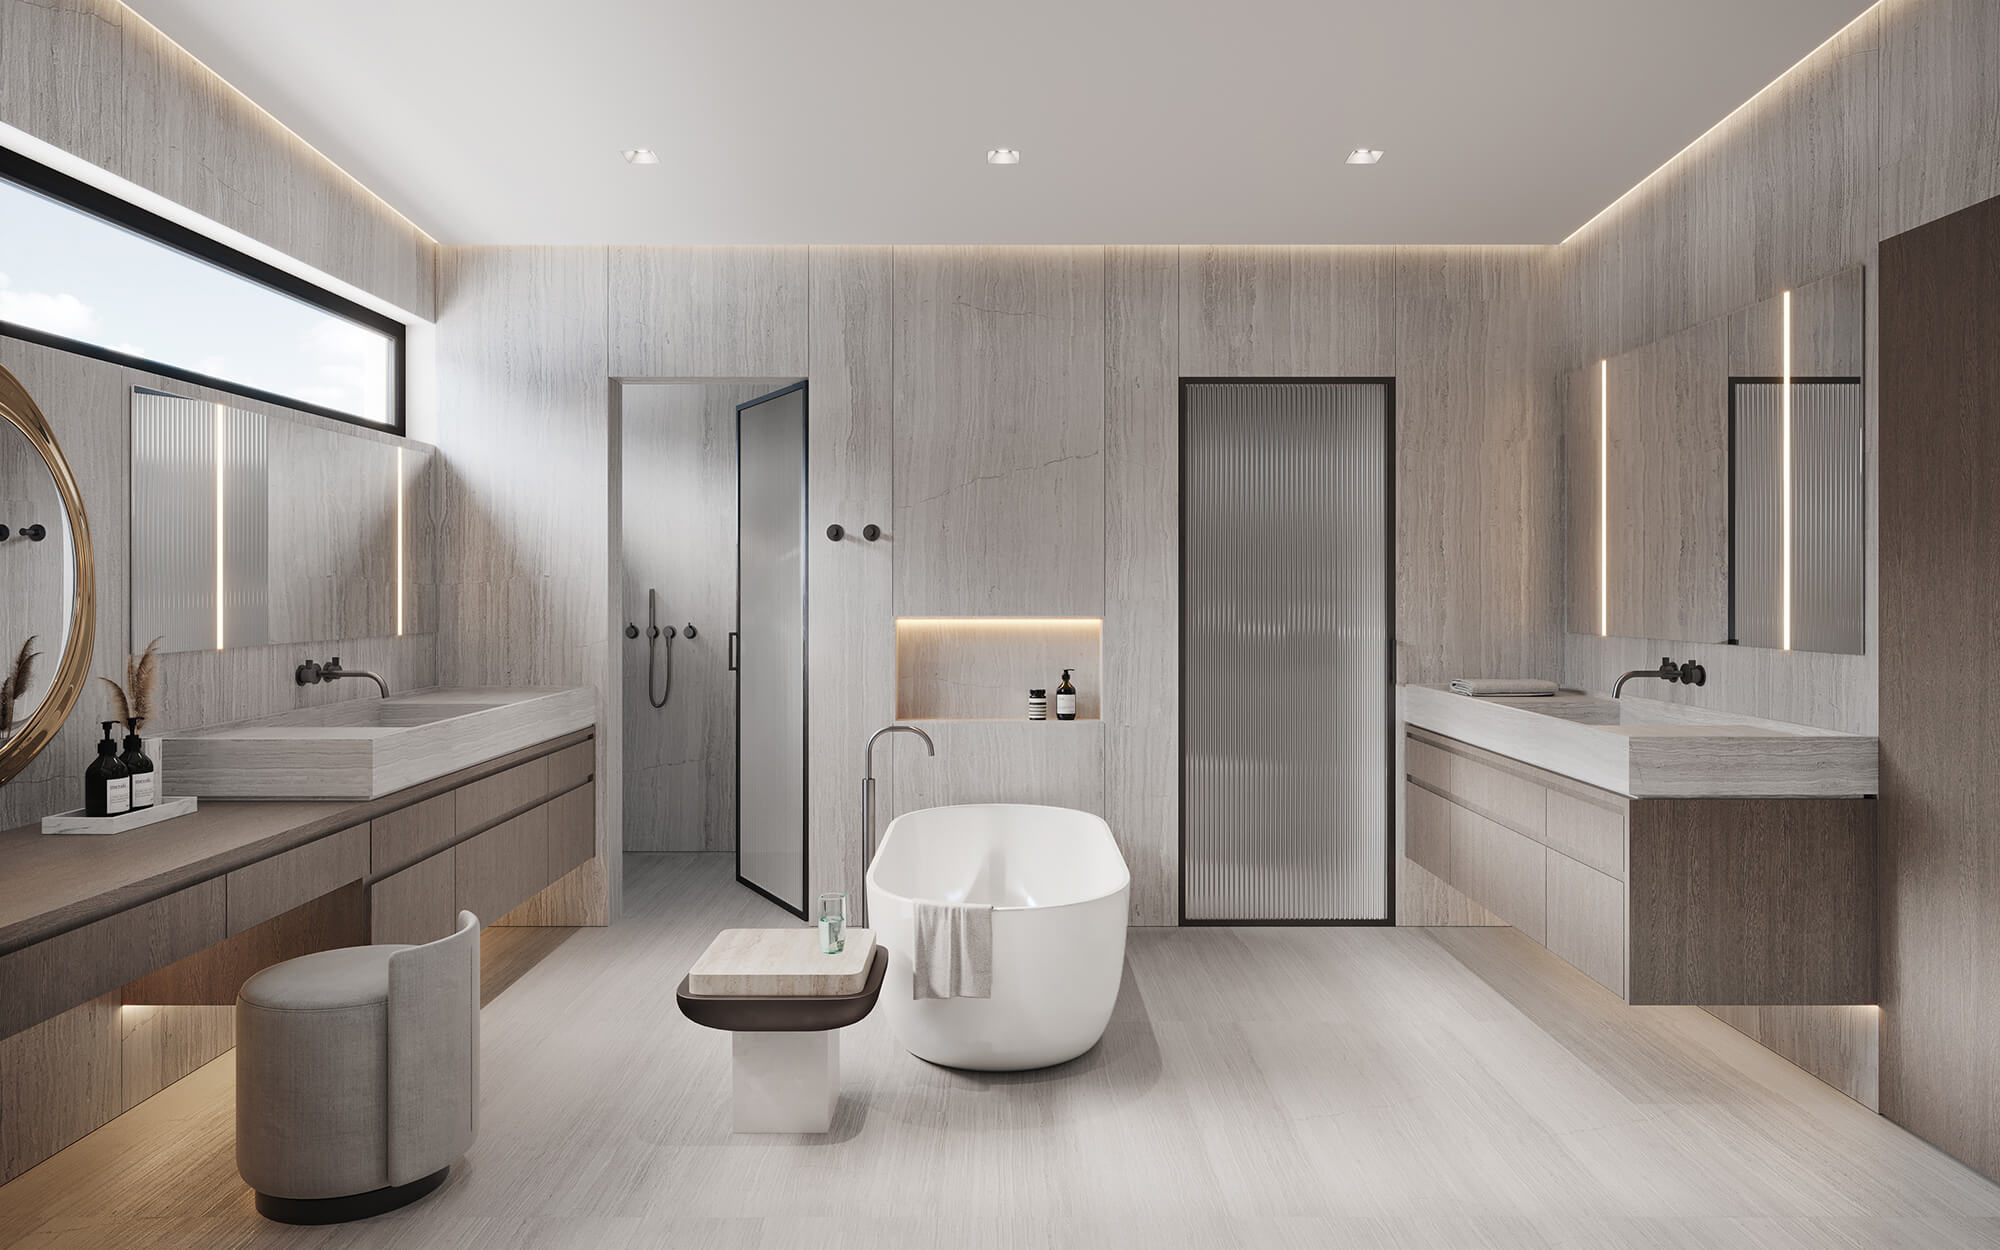 LIGHTHOUSE: New-Construction Residence Designed for Multi-Generational Use: Primary-Suite-Bathroom